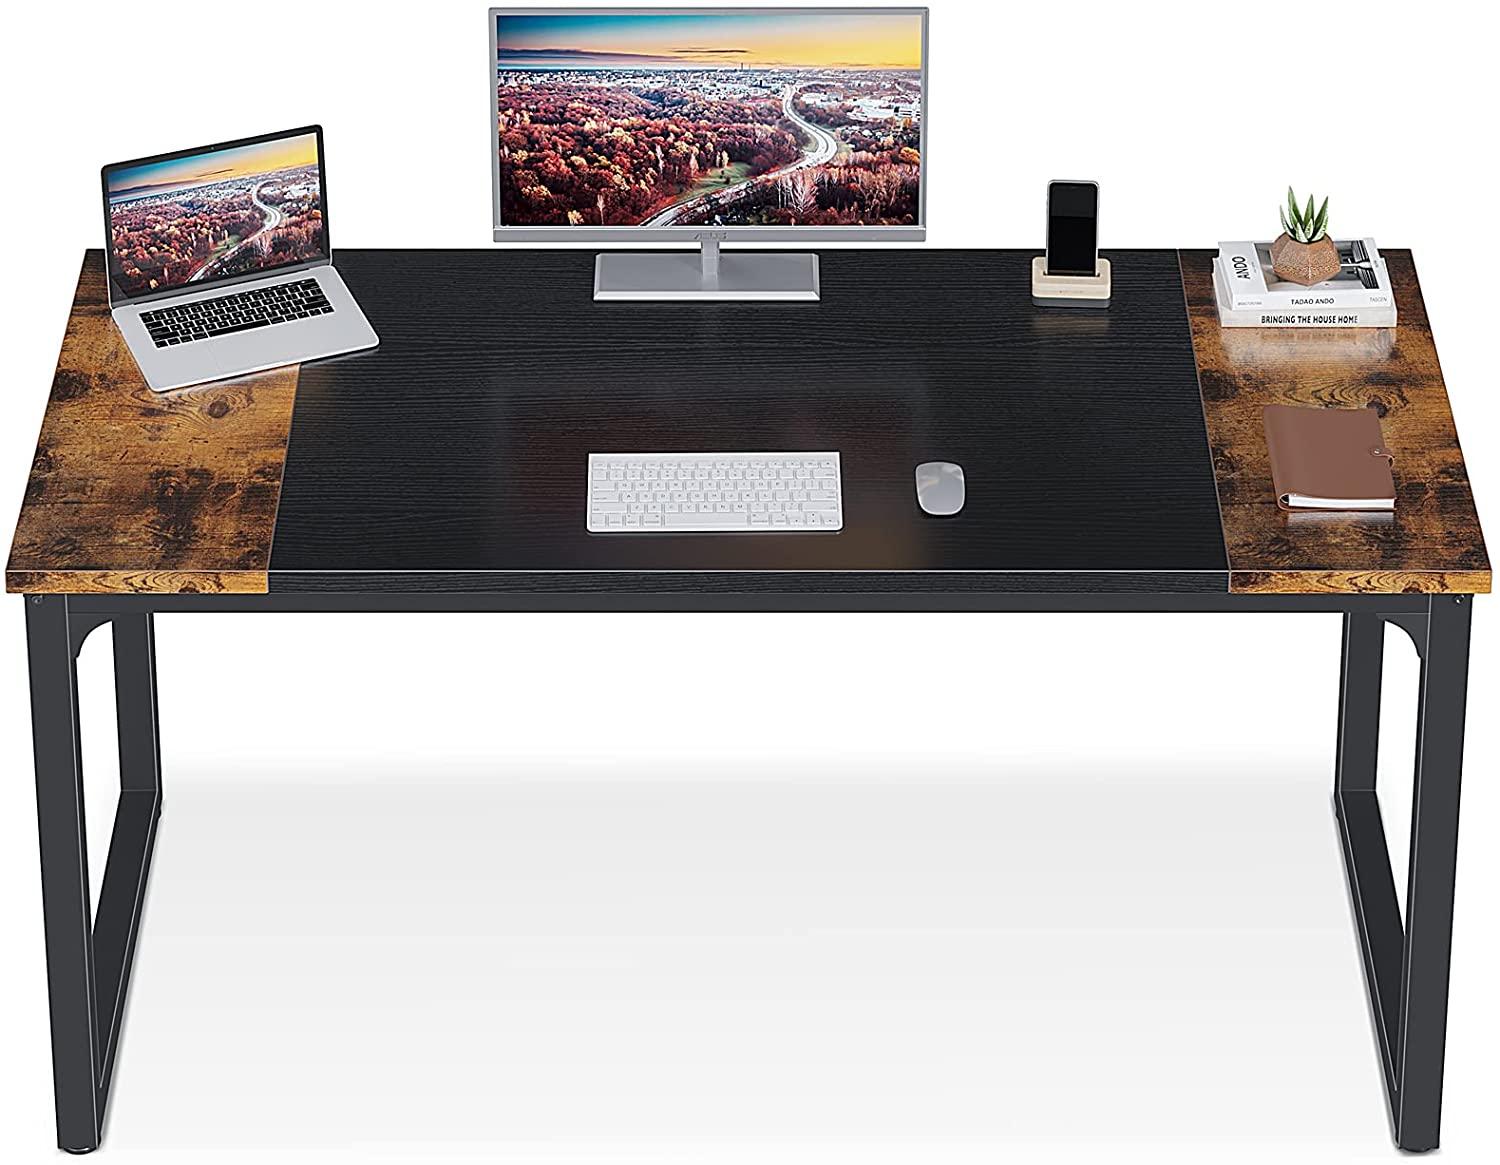 ODK Home Office Computer Desk for $44.99 Shipped